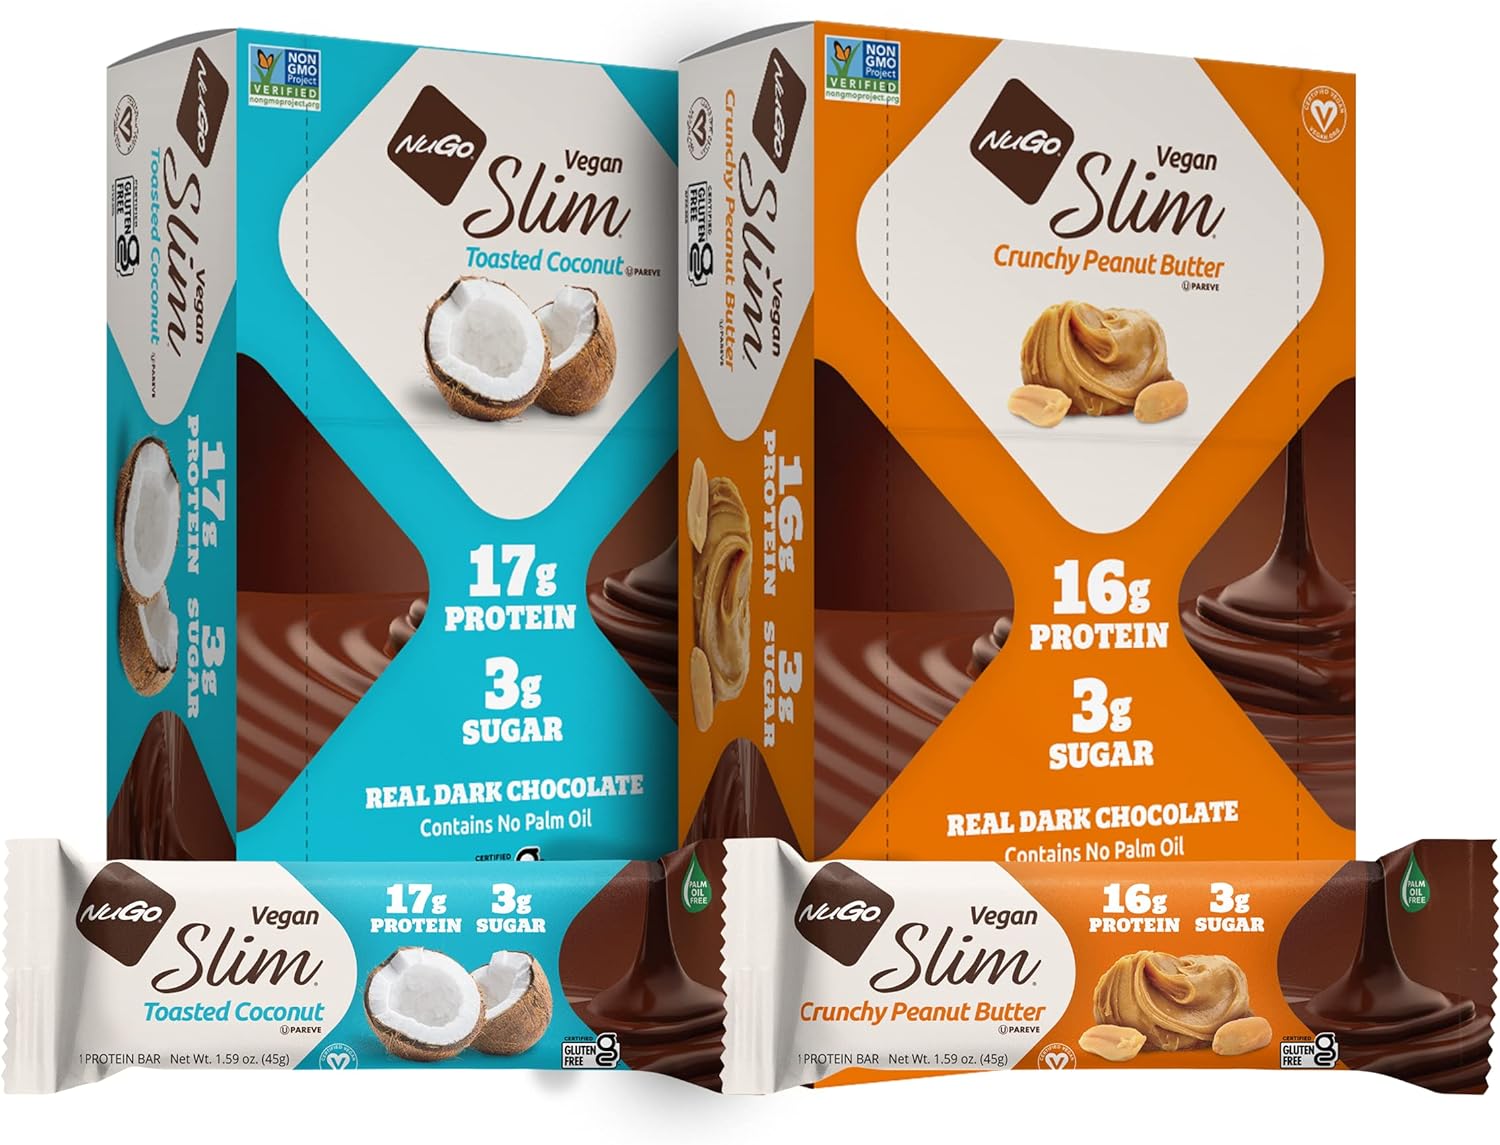 NuGo Slim 24ct Vegan Variety - Crunchy Peanut Butter 12 bars & Toasted4 Pounds